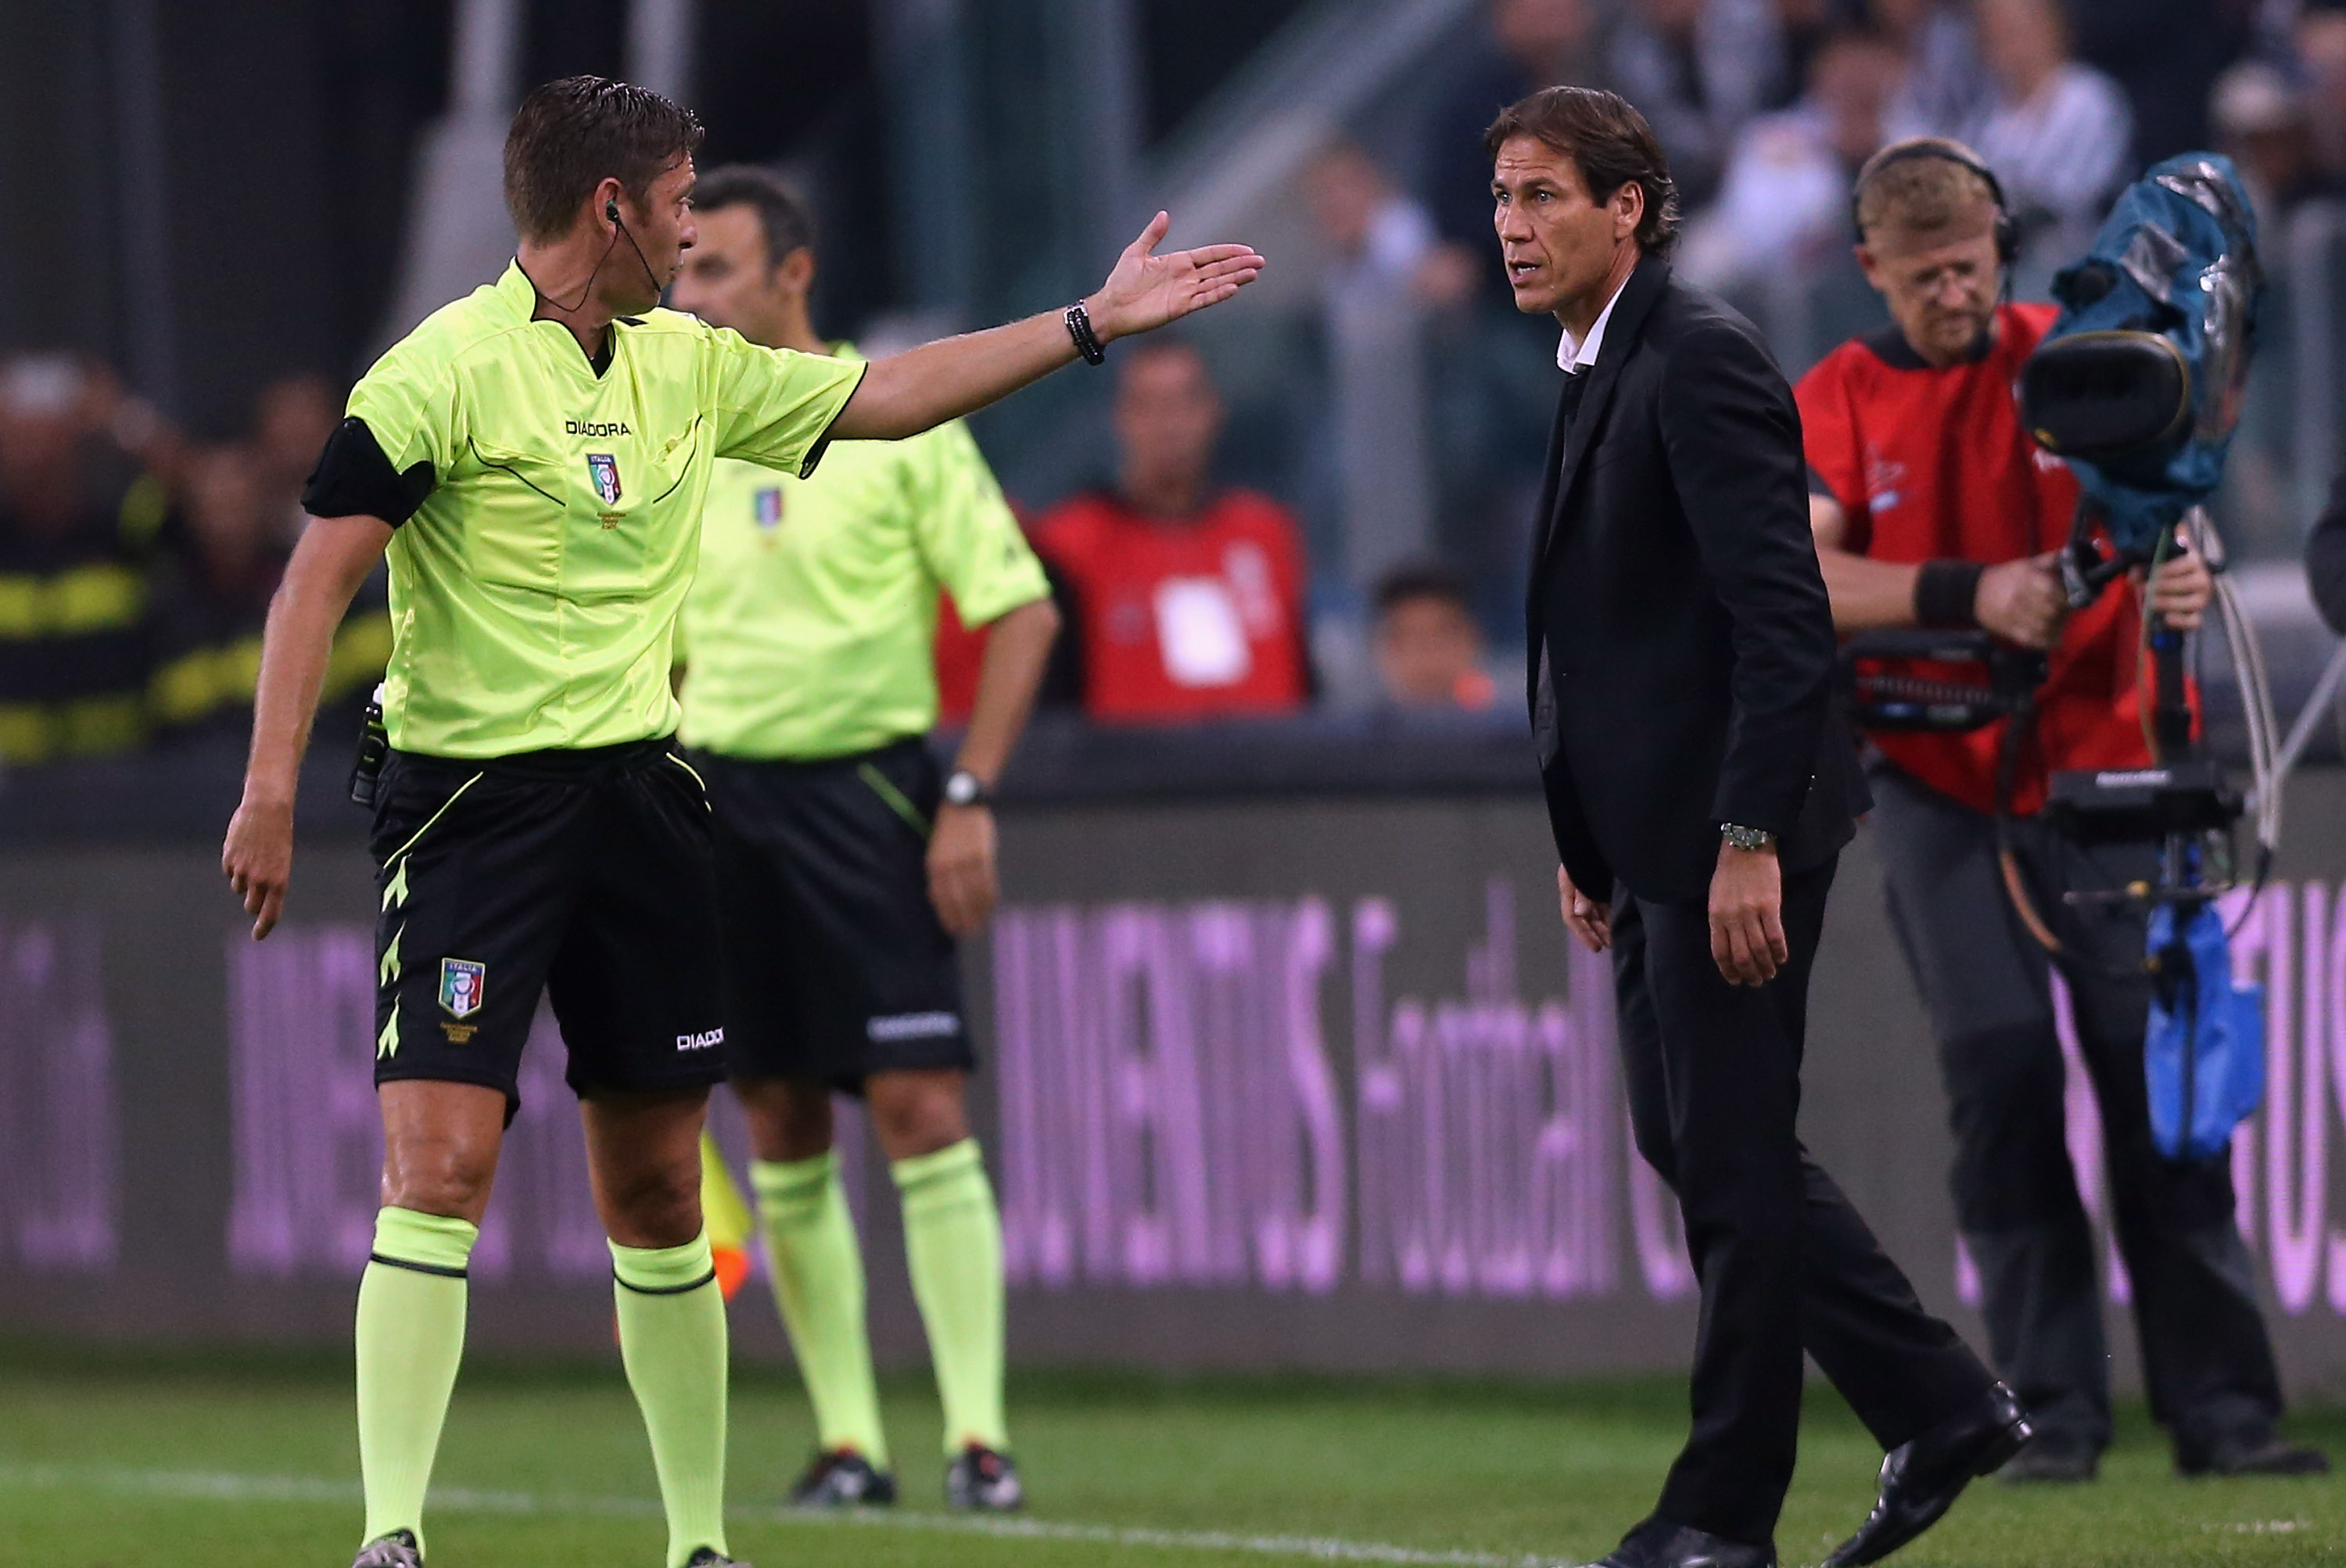 Juventus-Bologna referee to be suspended for not awarding clear penalty